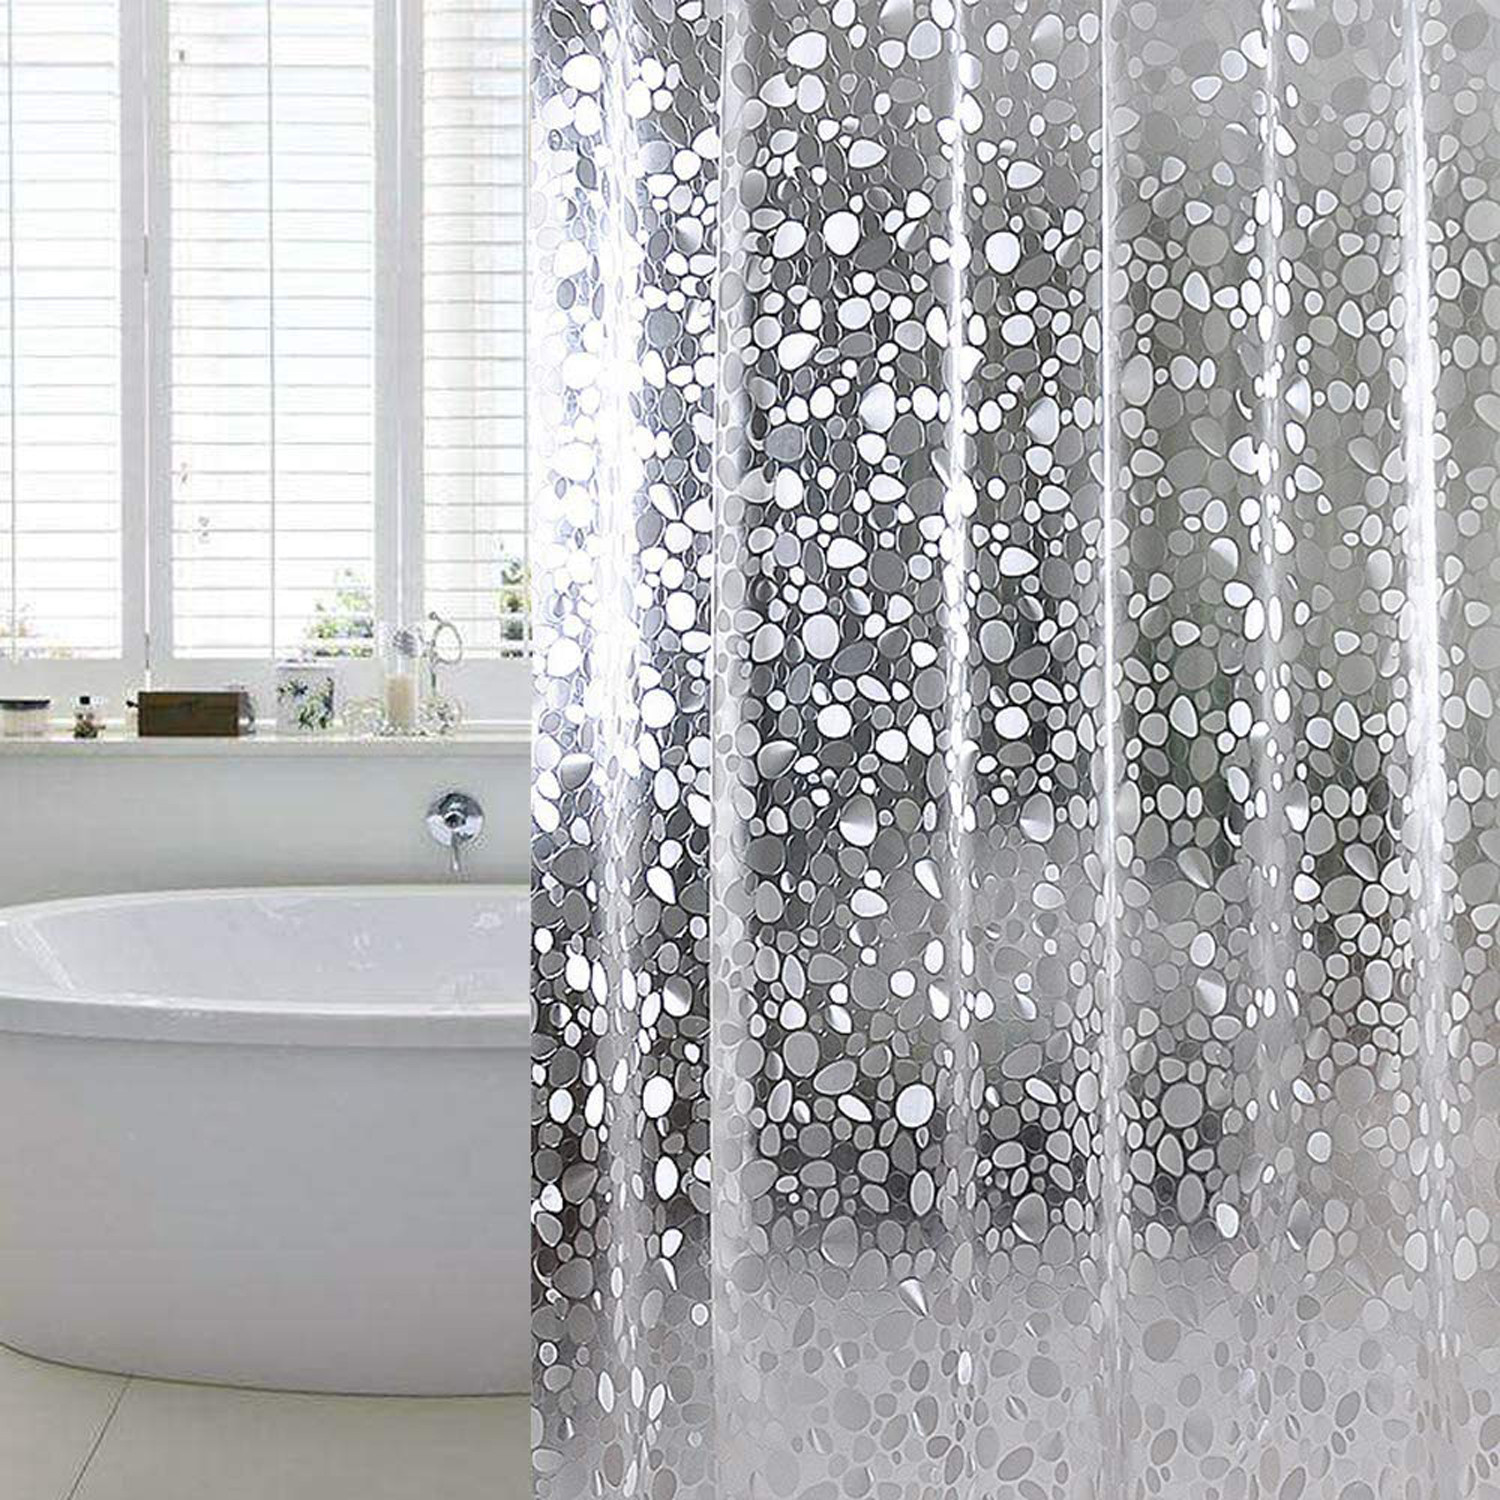 Kuber Industries 0.20mm 3D Stain Resistant, No Odor Clear Waterproof PVC AC Shower Curtain With Eyelets,7 Feet (Transparent)-HS_38_KUBMART21301